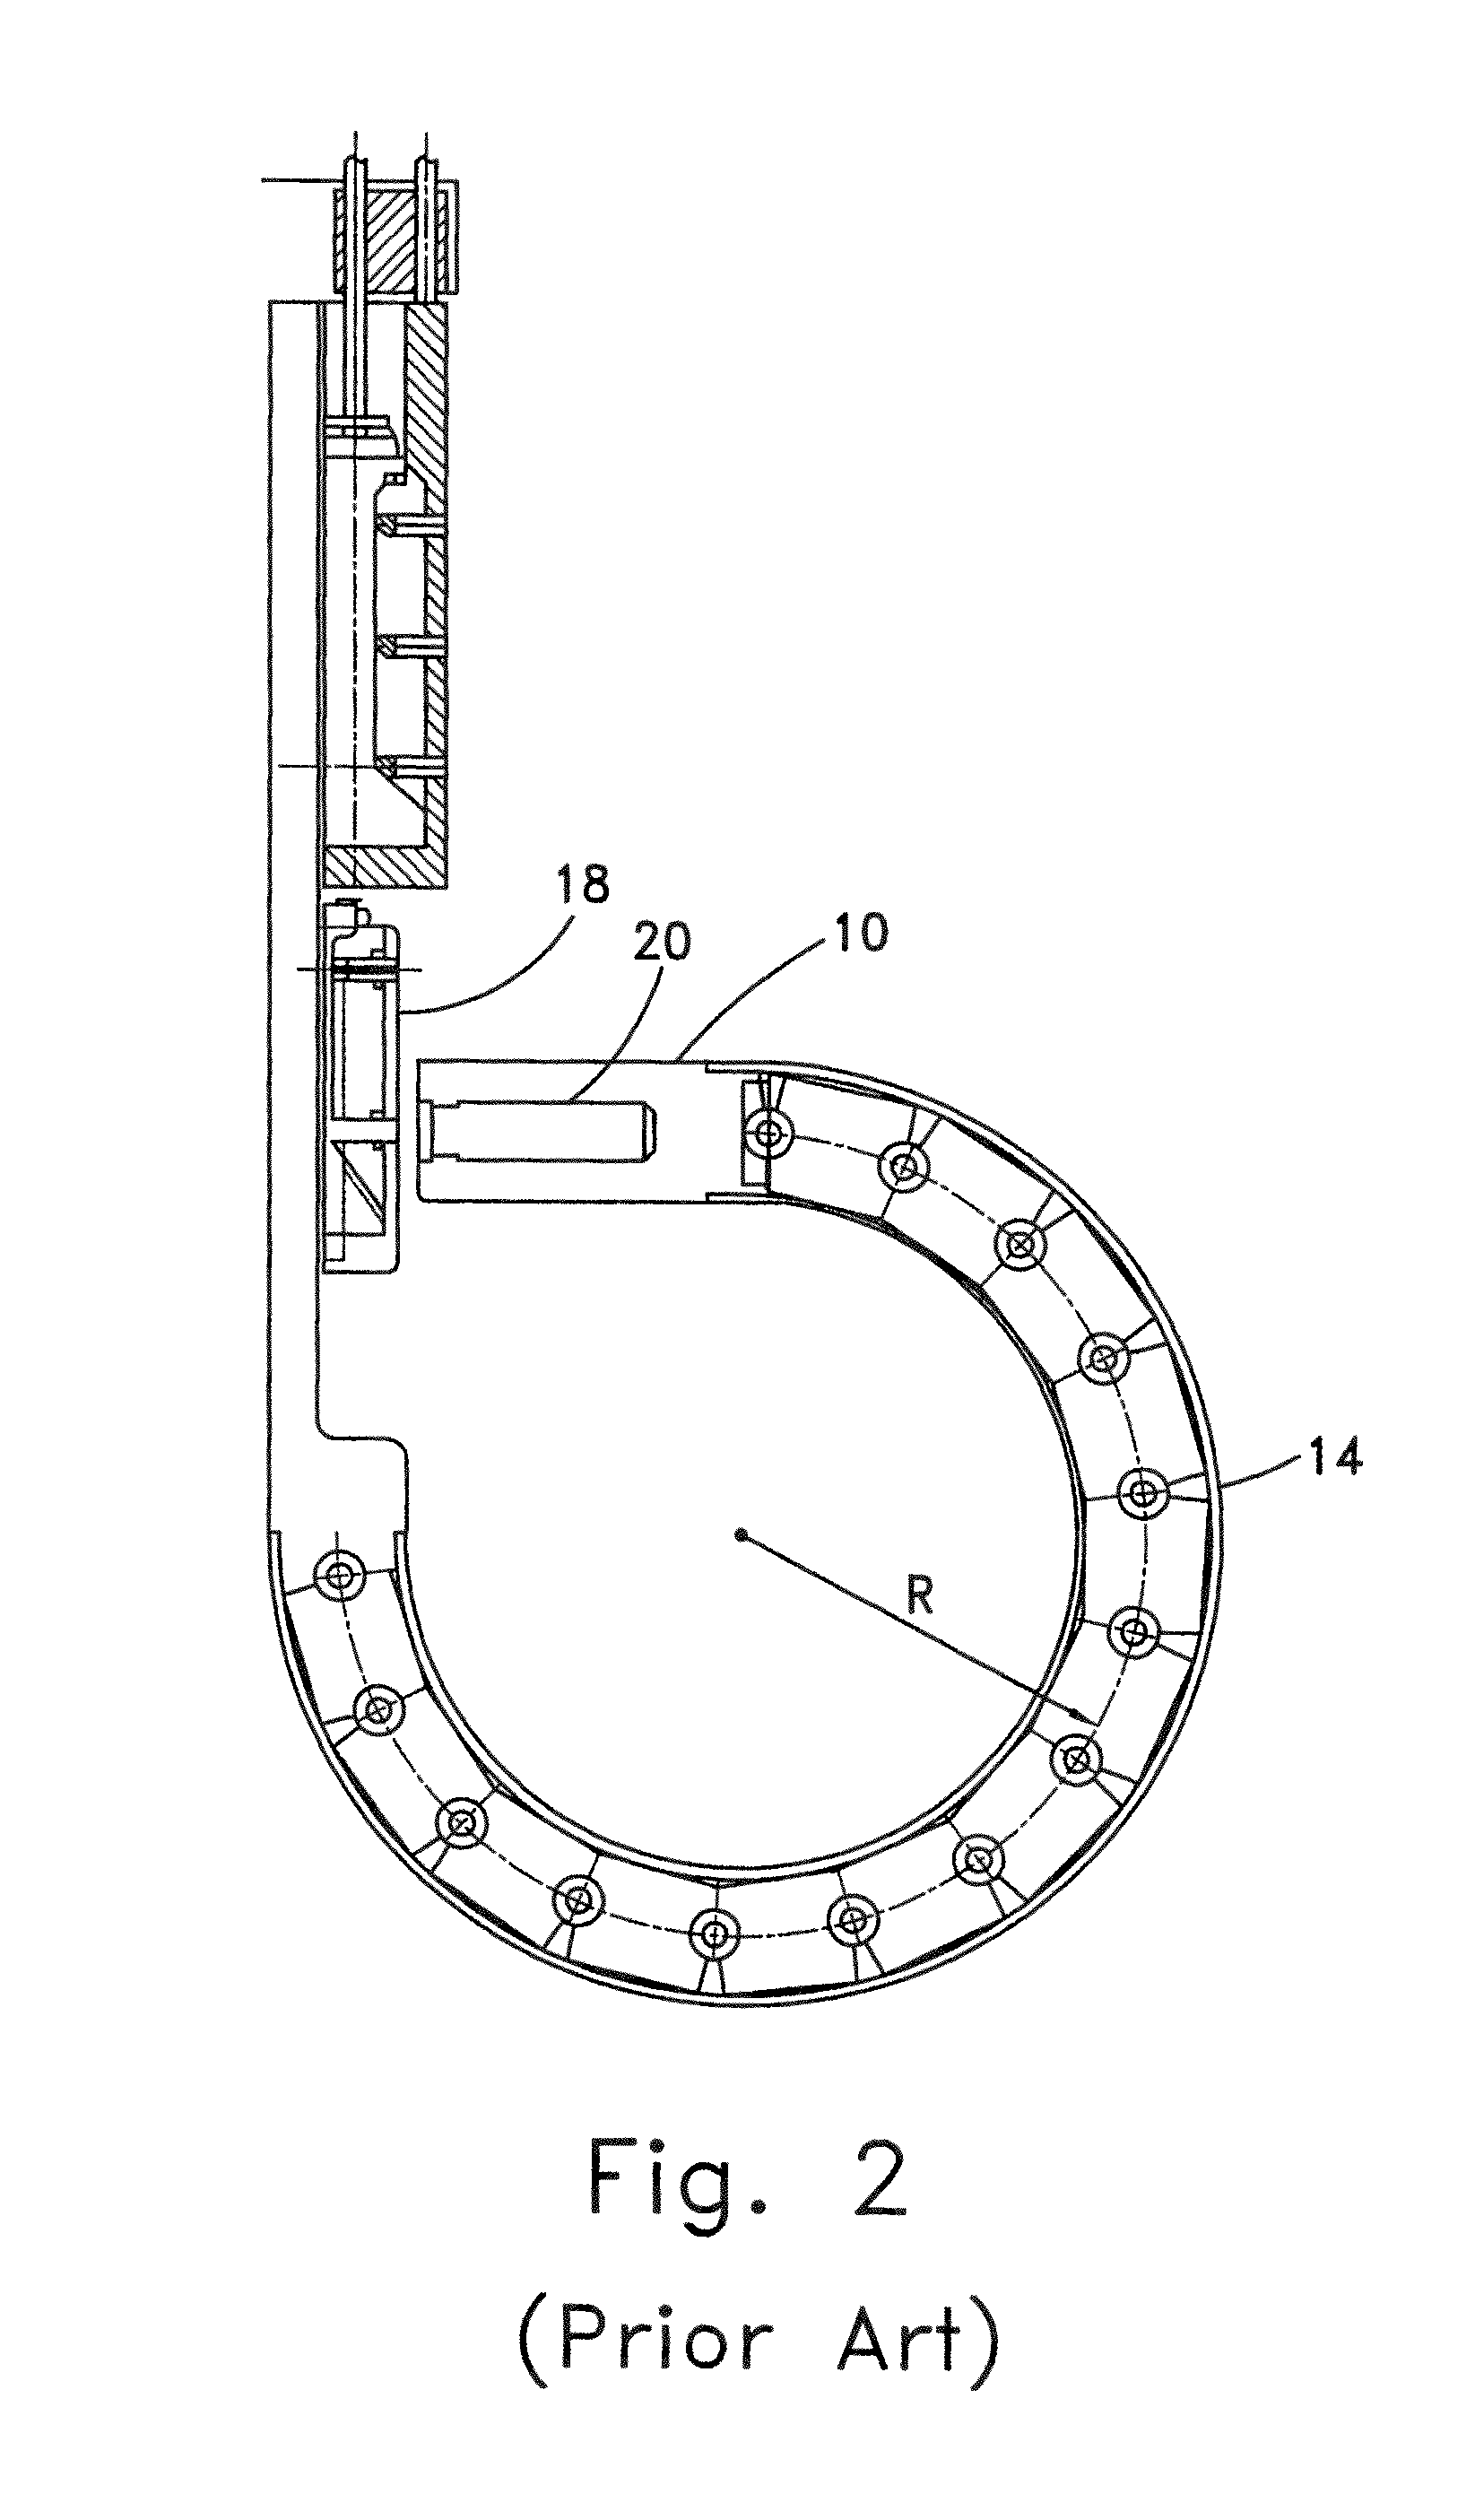 Medical device comprising alignment systems for bringing two portions into alignment